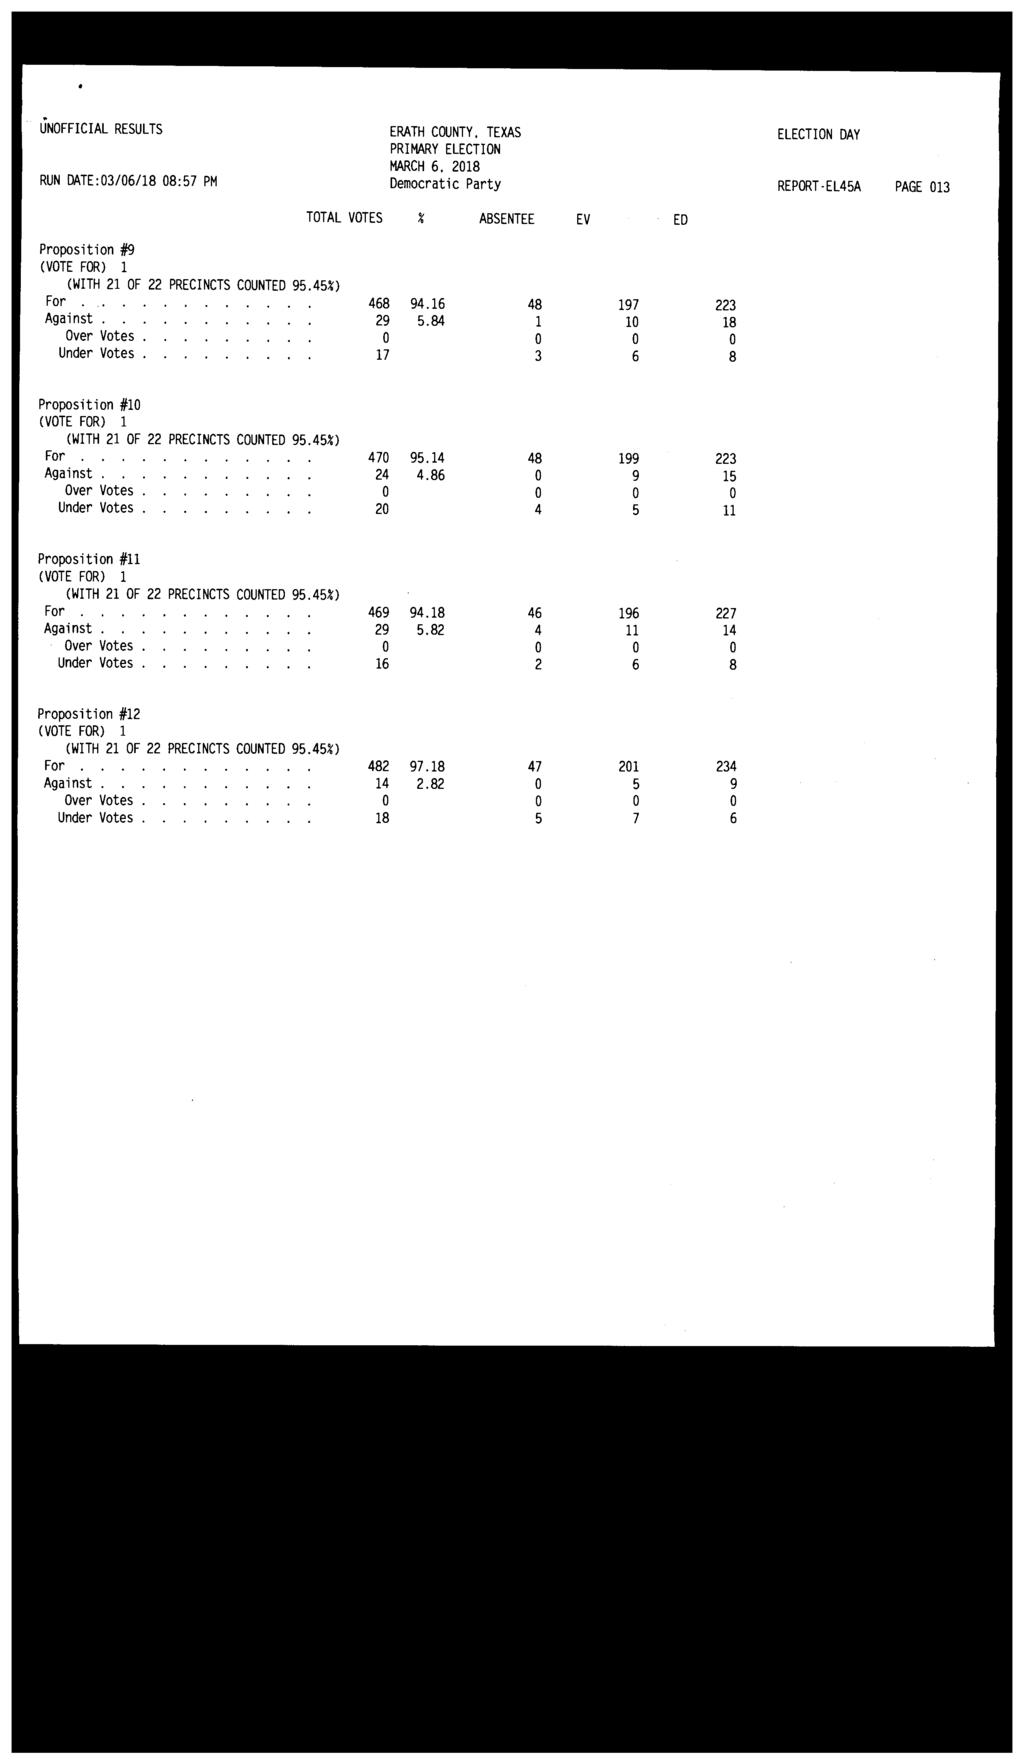 UNOFFICIAL RESULTS ERATH COUNTY, TEXAS ELECTION DAY MARCH 6. 2018 RUN DATE:03/06/18 08:57 PM Democratic Party REPORT EL45A PAGE 013 TOTAL VOTES.